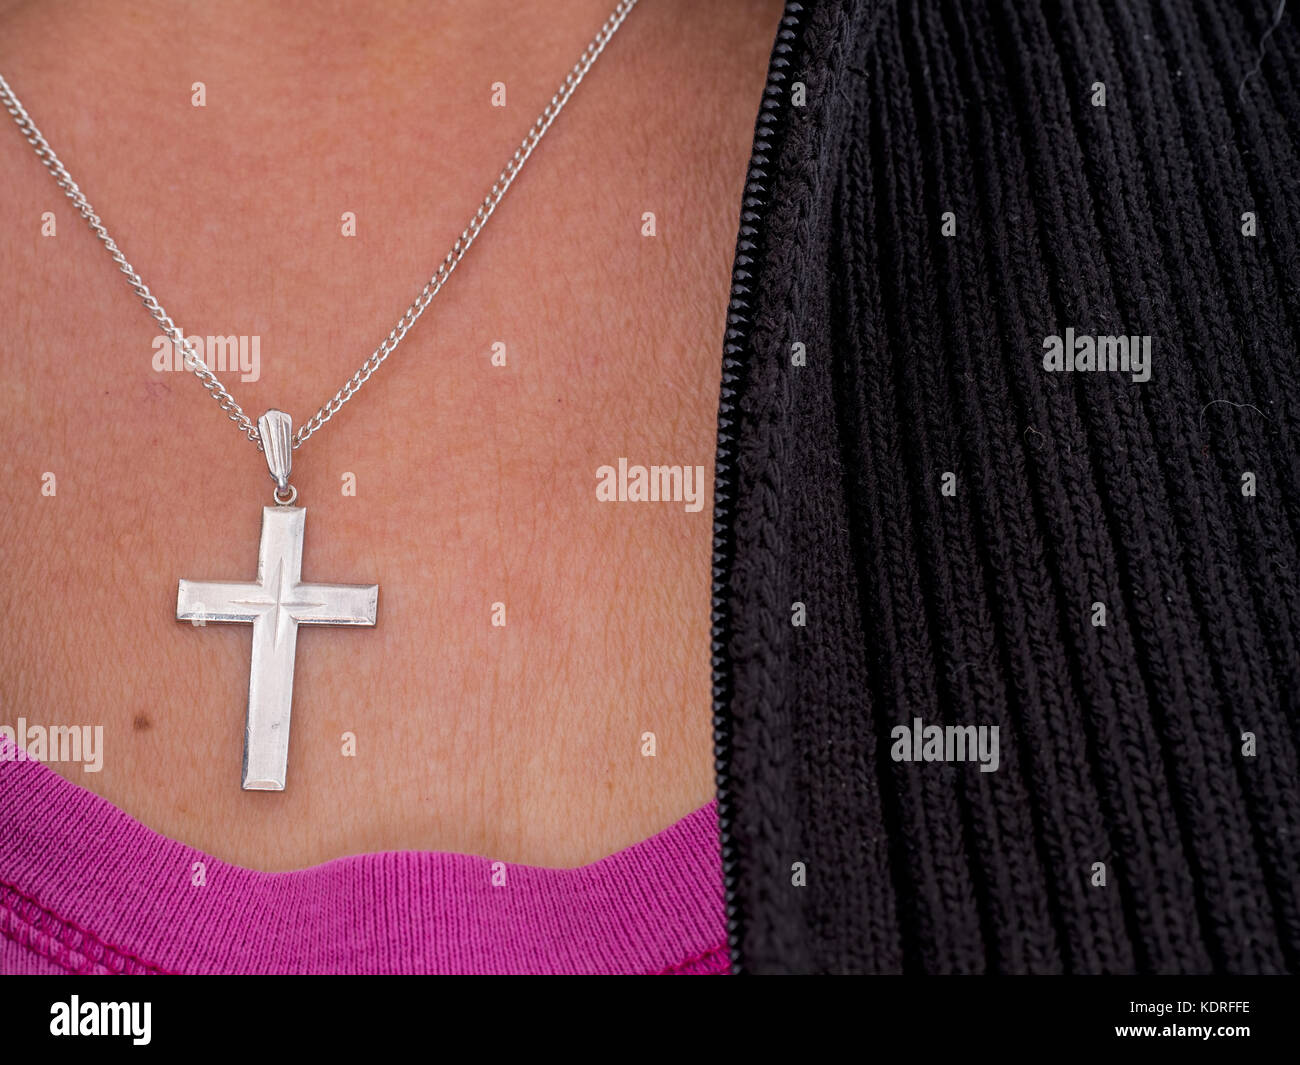 Woman with cross and chain, silver. Informal clothes, religious symbol. Stock Photo